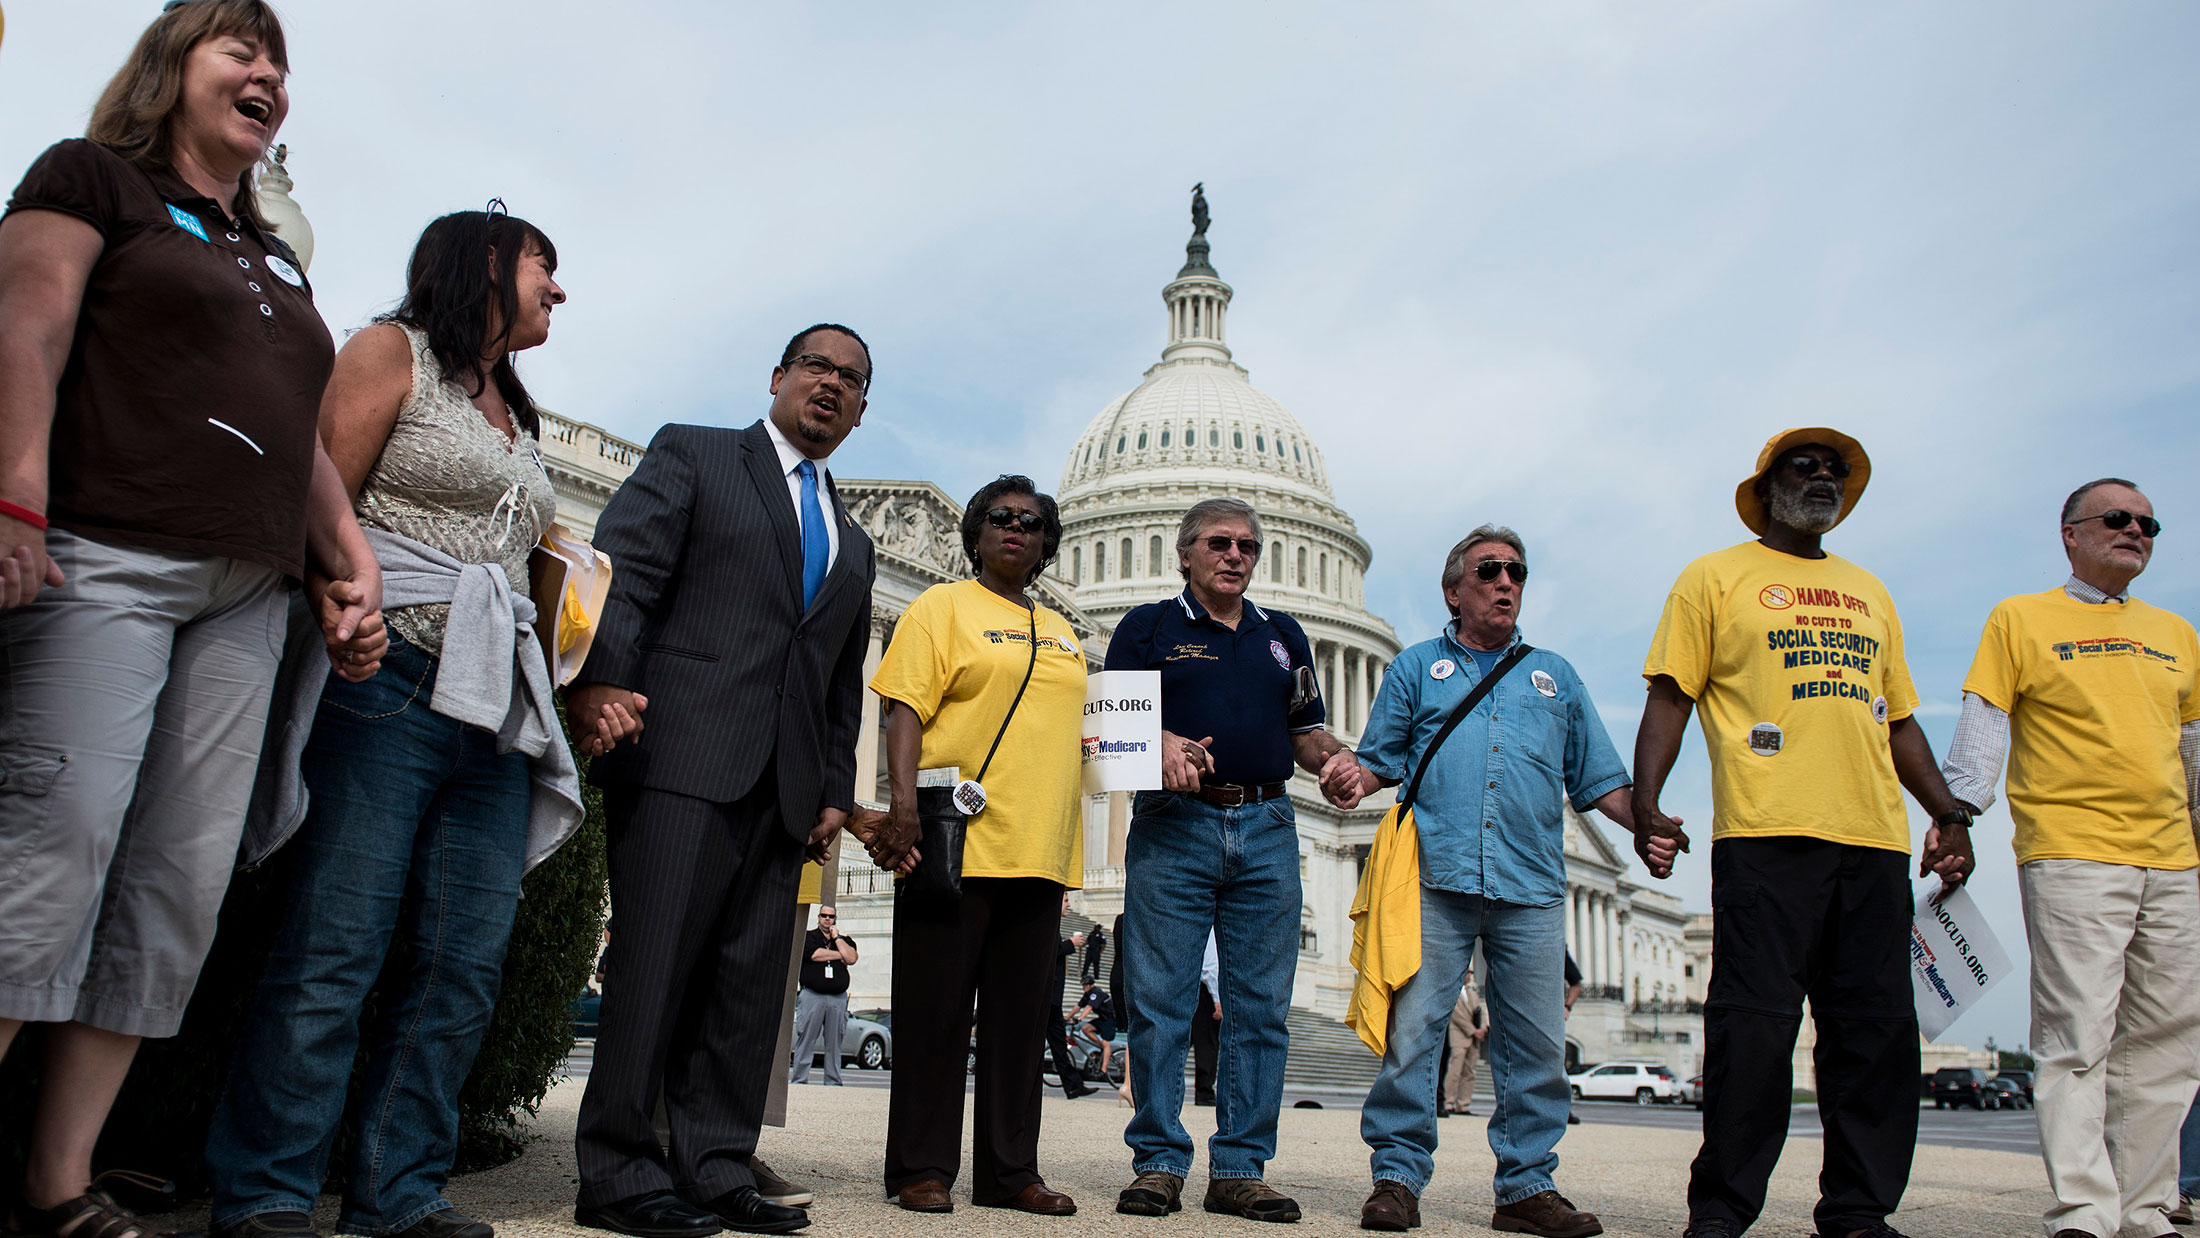 Demonstrators protest cuts to Social Security in Washington, D.C.
